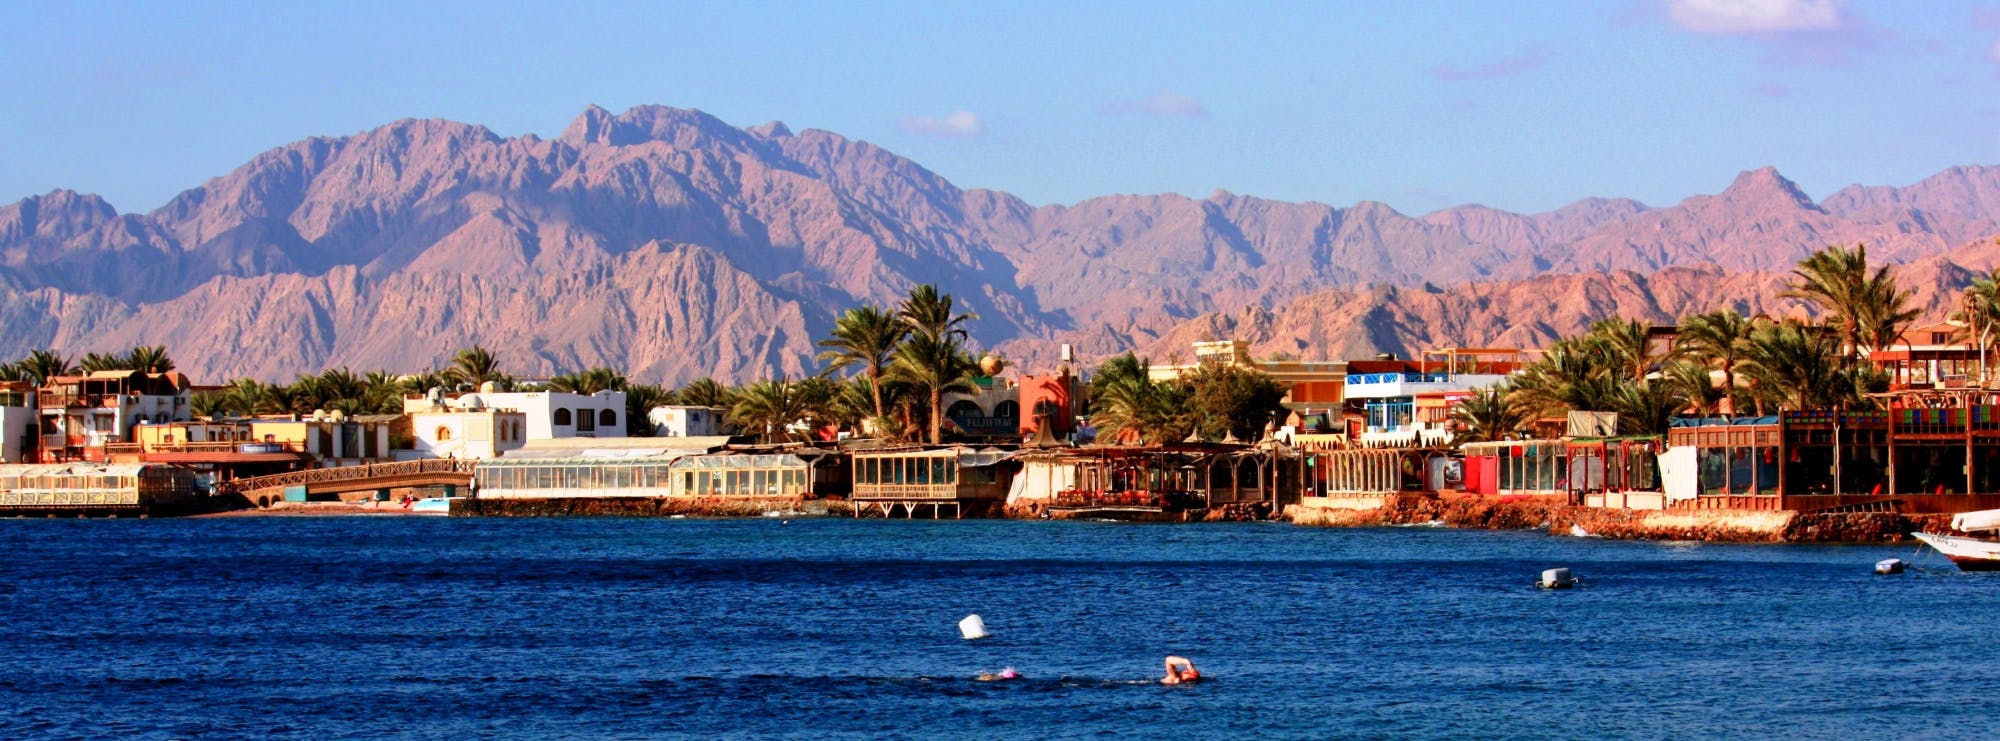 Full day Royal Seascope snorkelling cruise with lunch from Dahab Musement